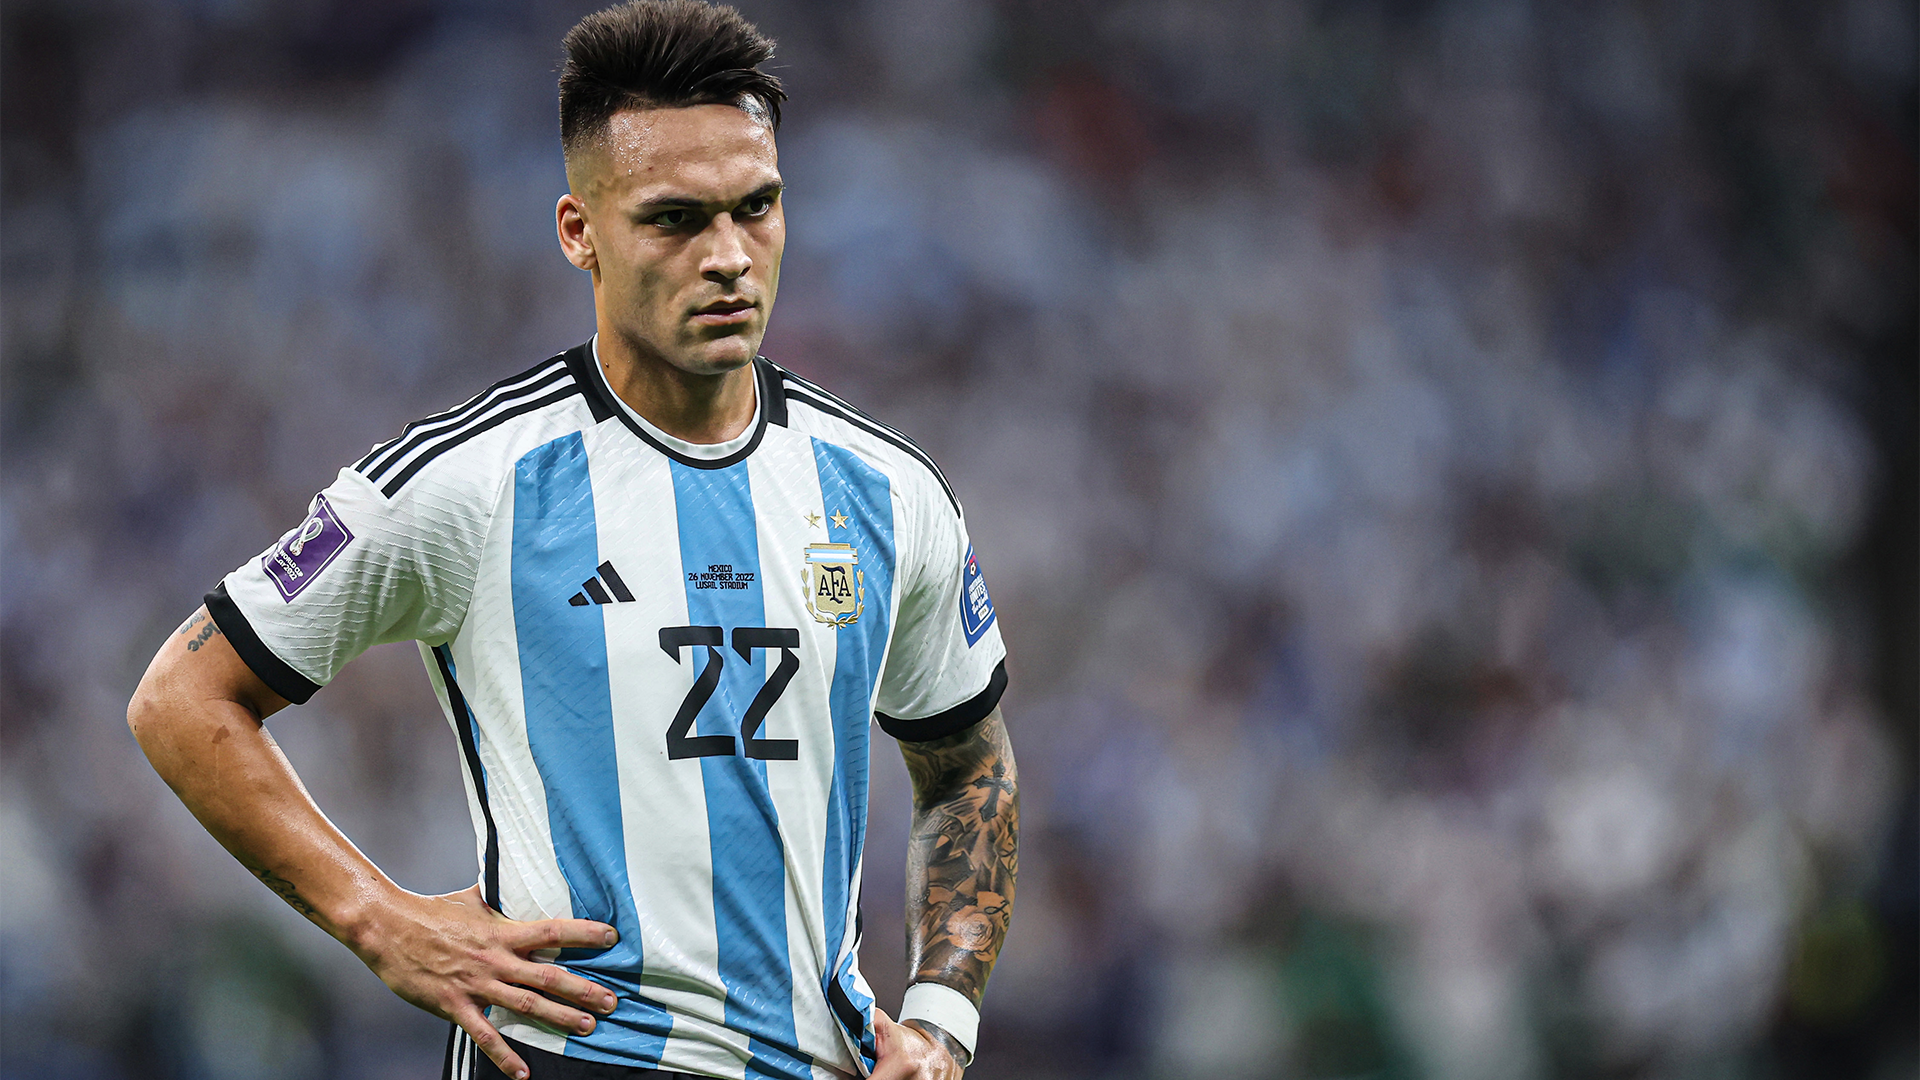 Argentine forward Lautaro Martínez is taking pain-killing injections to play at World Cup 2022